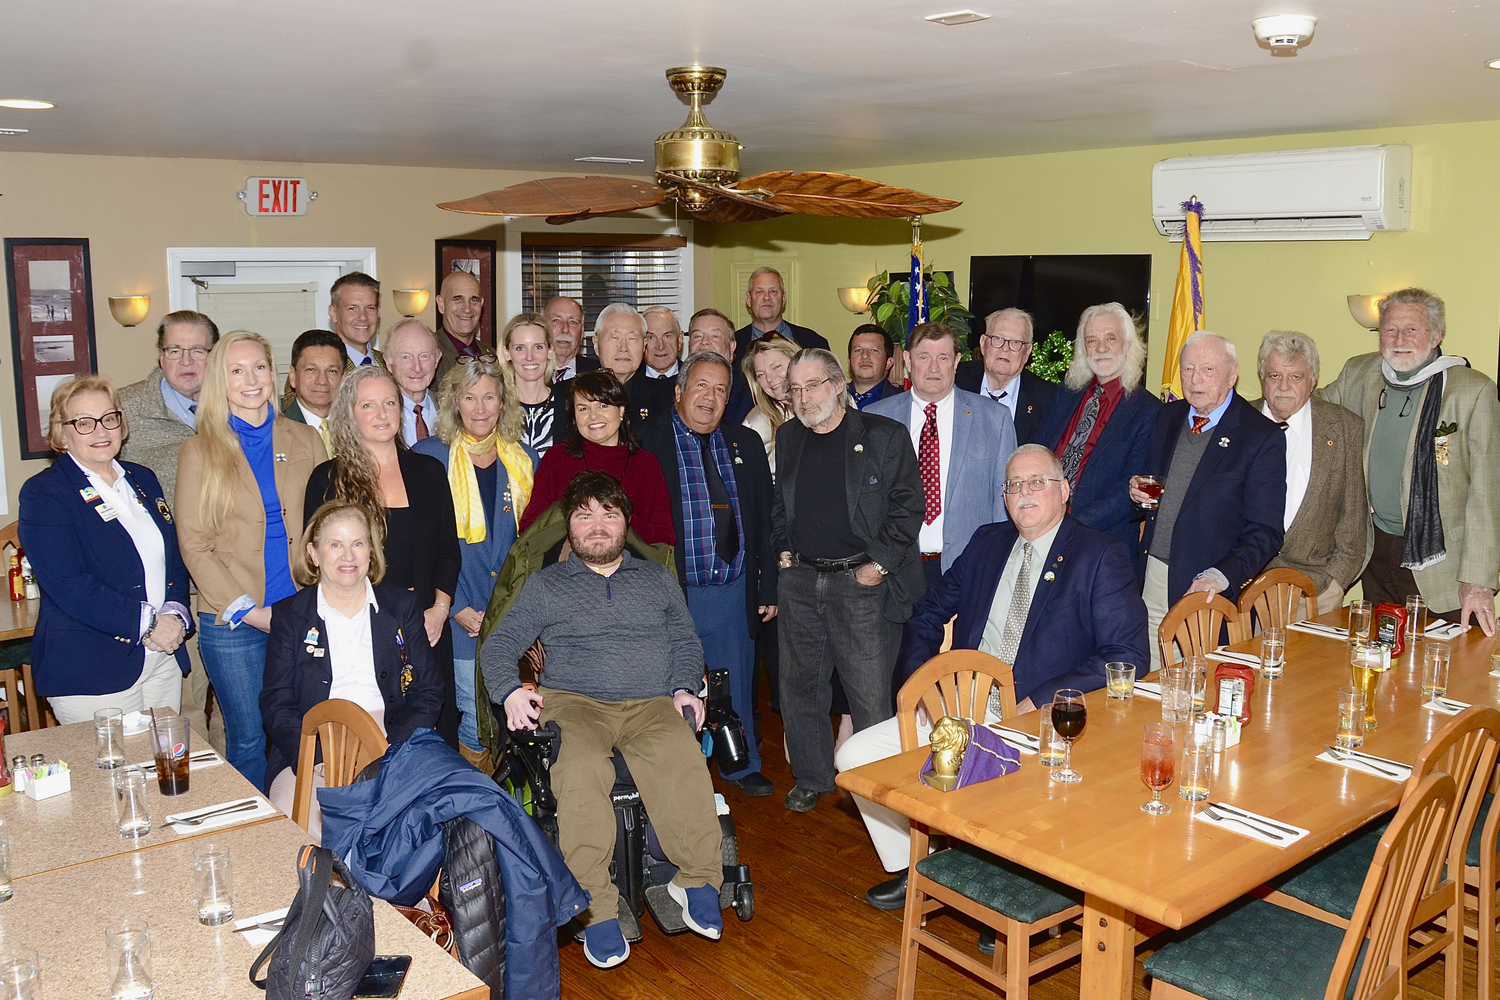 After a seven year hiatus of yearly joint meetings the Montauk Point Lions Club hosted the East Hampton Lions Club at a meeting on March 22at Sammy’s Restaurant in Montauk to celebrate 75 years of service by both clubs to the local community. Montauk Lion Tom Dess was the master of ceremonies.  He recognized that a joint meeting had not occurred in some time, but that Lions are united in their goal to serve the community with a focus on health and sight. He also acknowledged that it was International Woman’s Month, and recognized Lions at the meeting who have and still serve in the East Hampton Lions Club in leadership positions for over a decade, including Rachel Lys, Kelly White, Amber Talmage, Alice Cooley, and Tina Piette.  Included in that recognition was Lisa Valcich, the second woman in the Montauk Club to be admitted since it was chartered 75 years ago.  KYRIL BROMLEY